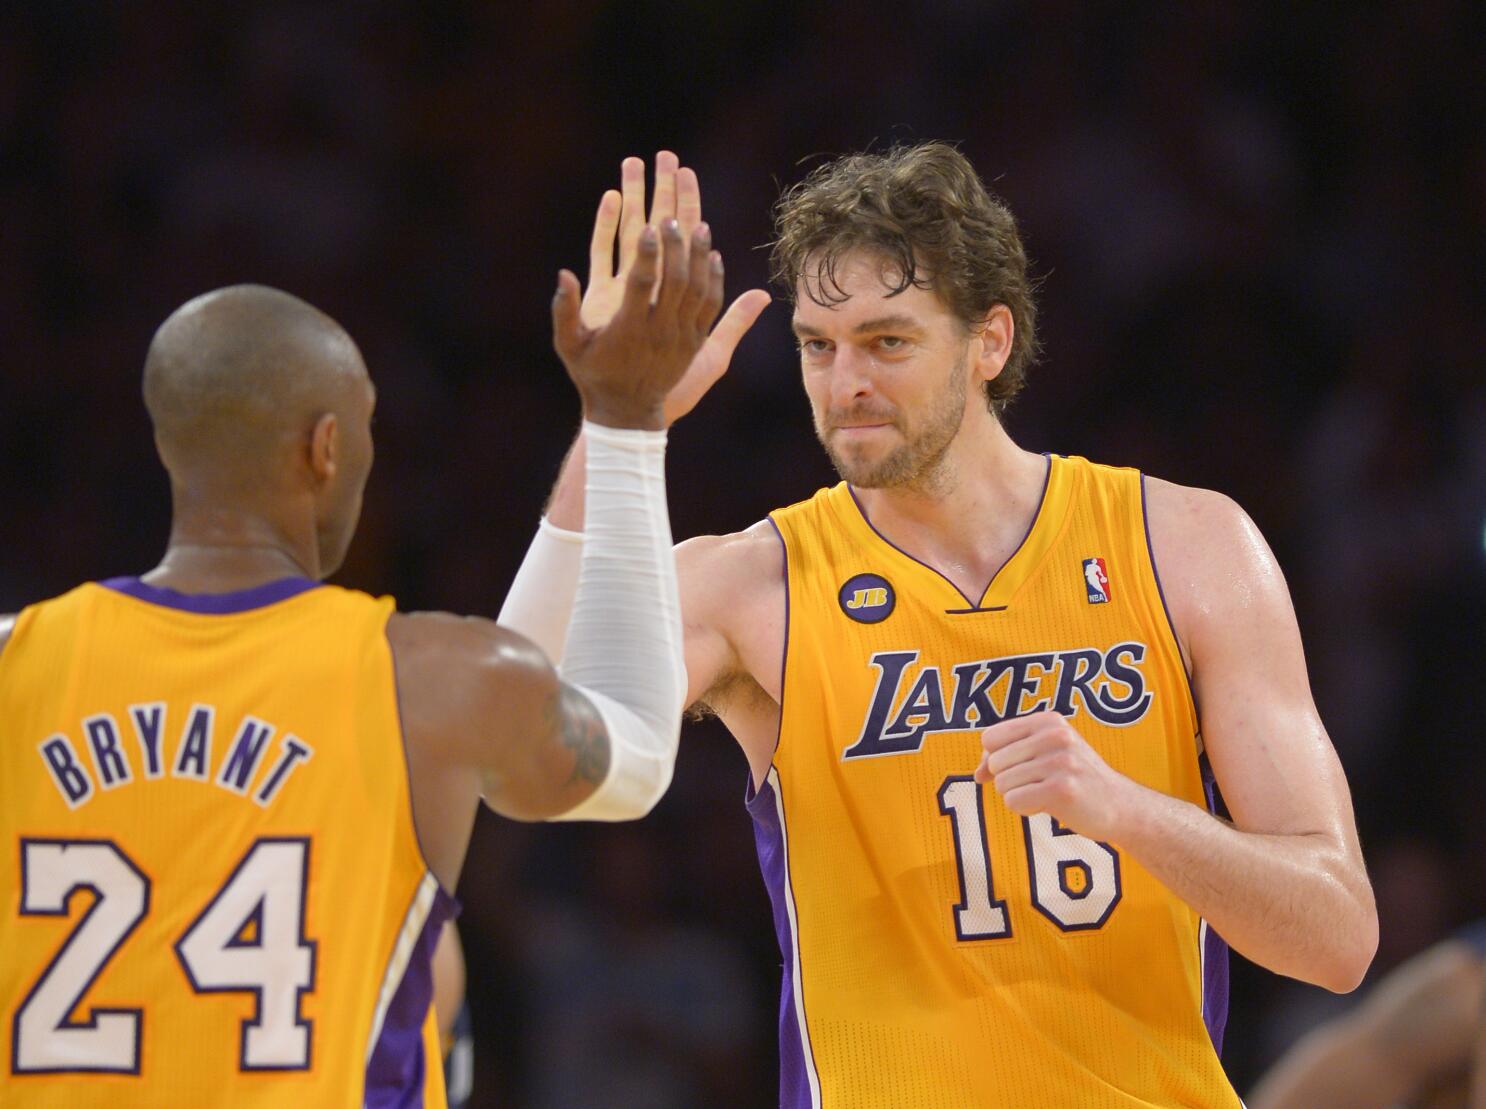 Lakers to retire Pau Gasol's jersey No. 16 in March - Los Angeles Times